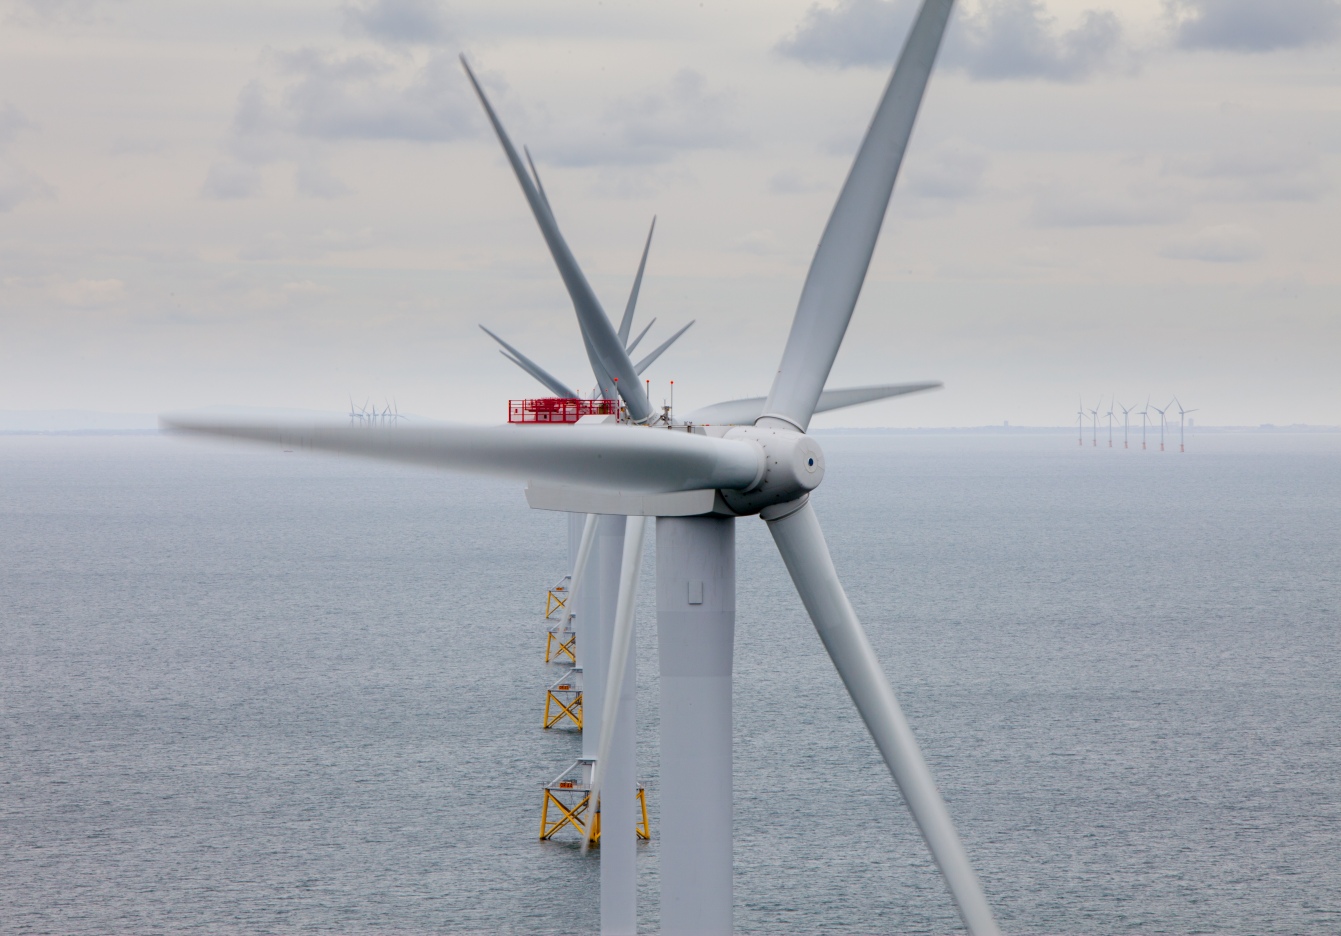 UK: Ormonde Offshore Wind Farm Officially Inaugurated